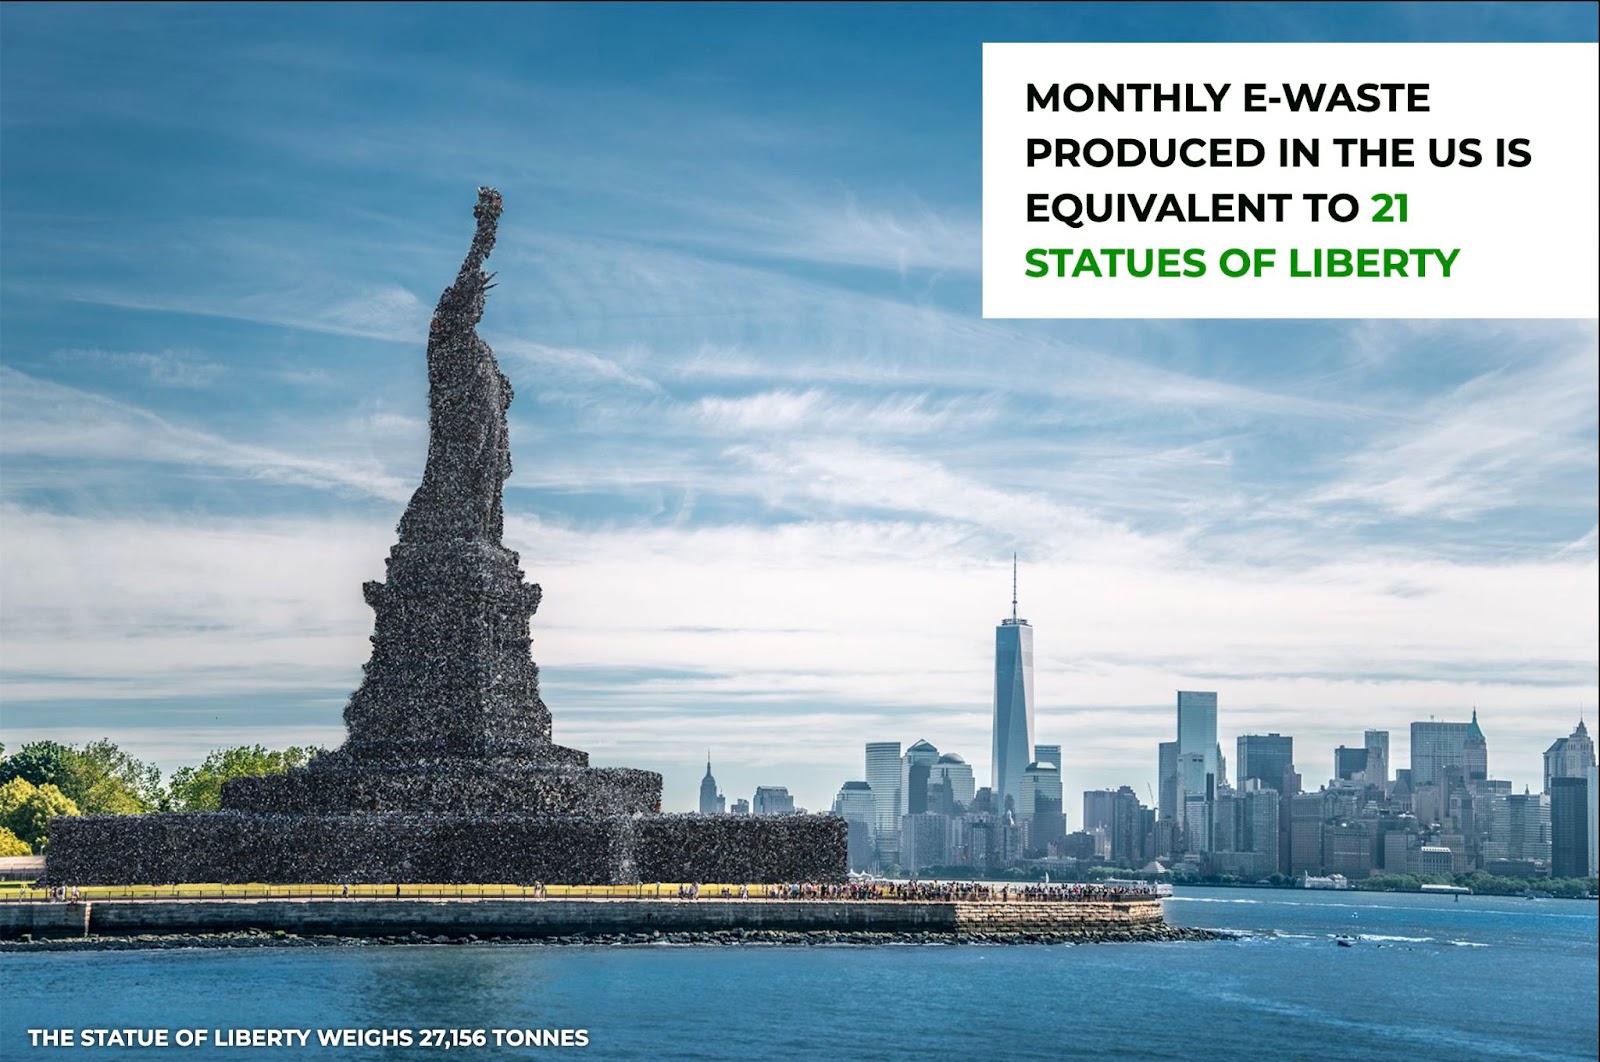 Statue of Liberty as a metaphor of the monthly e-waste produced in the US